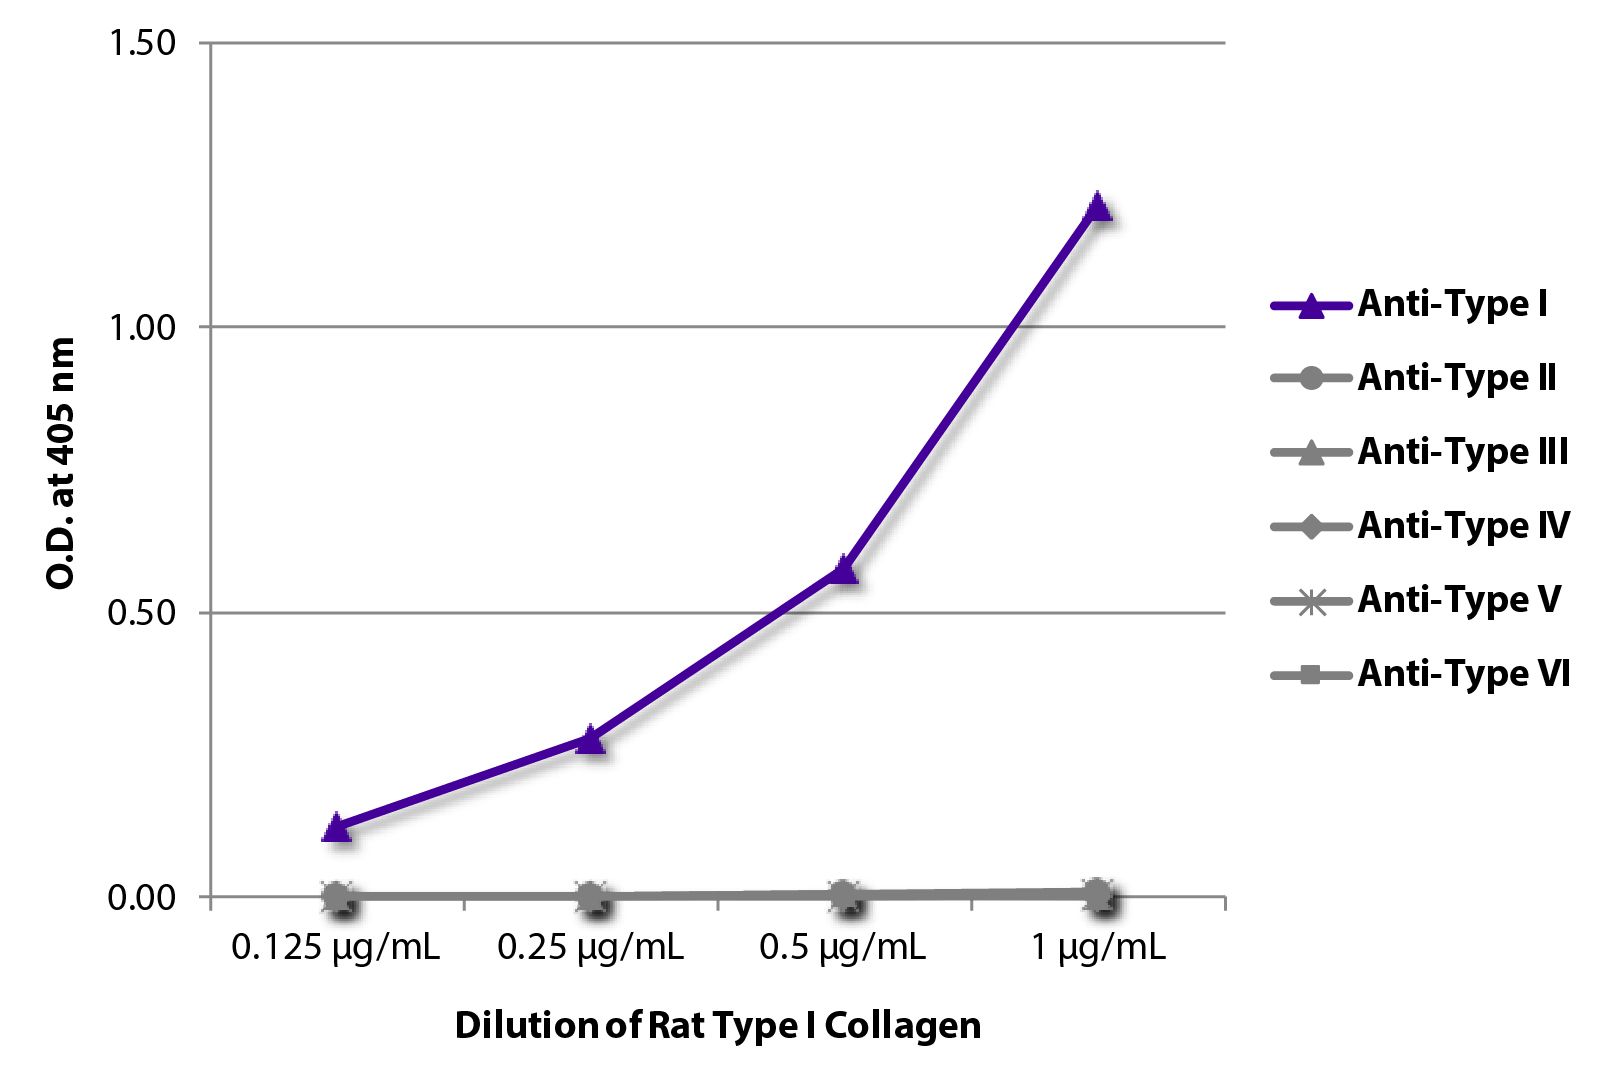 ELISA plate was coated with serially diluted Rat Type I Collagen (SB Cat. No. 1200-03S).  Purified collagen was detected with Goat Anti-Type I Collagen-BIOT (SB Cat. No. 1310-08), Goat Anti-Type II Collagen-BIOT (SB Cat. No. 1320-08), Goat Anti-Type III Collagen-BIOT (SB Cat. No. 1330-08), Goat Anti-Type IV Collagen-BIOT (SB Cat. No. 1340-08), Goat Anti-Type V Collagen-BIOT (SB Cat. No. 1350-08), and Goat Anti-Type VI Collagen-BIOT (SB Cat. No. 1360-08) followed by Streptavidin-HRP (SB Cat. No. 7100-05).